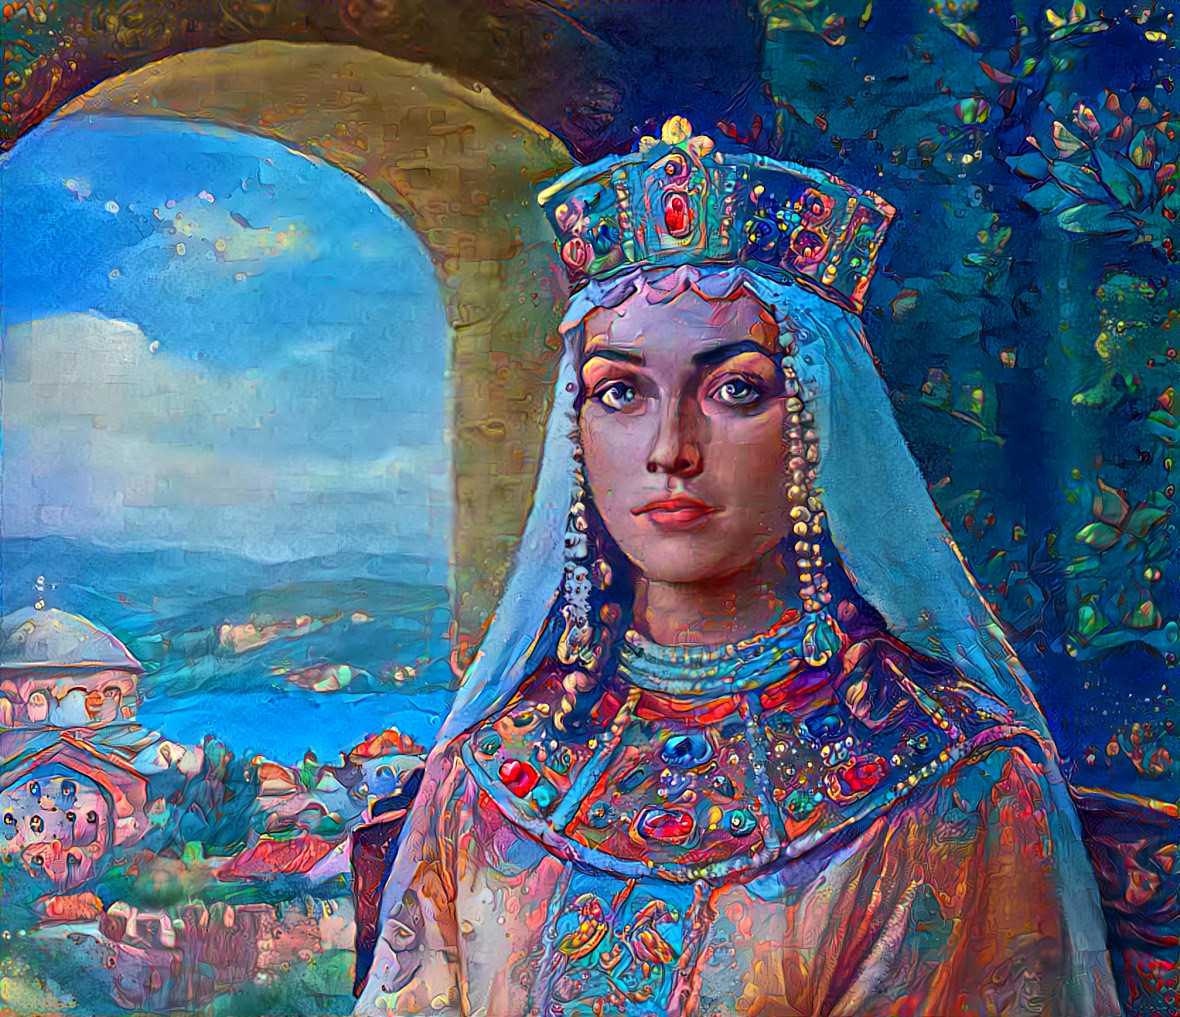 Anne, daughter of Yaroslav the Wise, Great Prince of Kiev and Novgorod. Became Queen of France in 1051